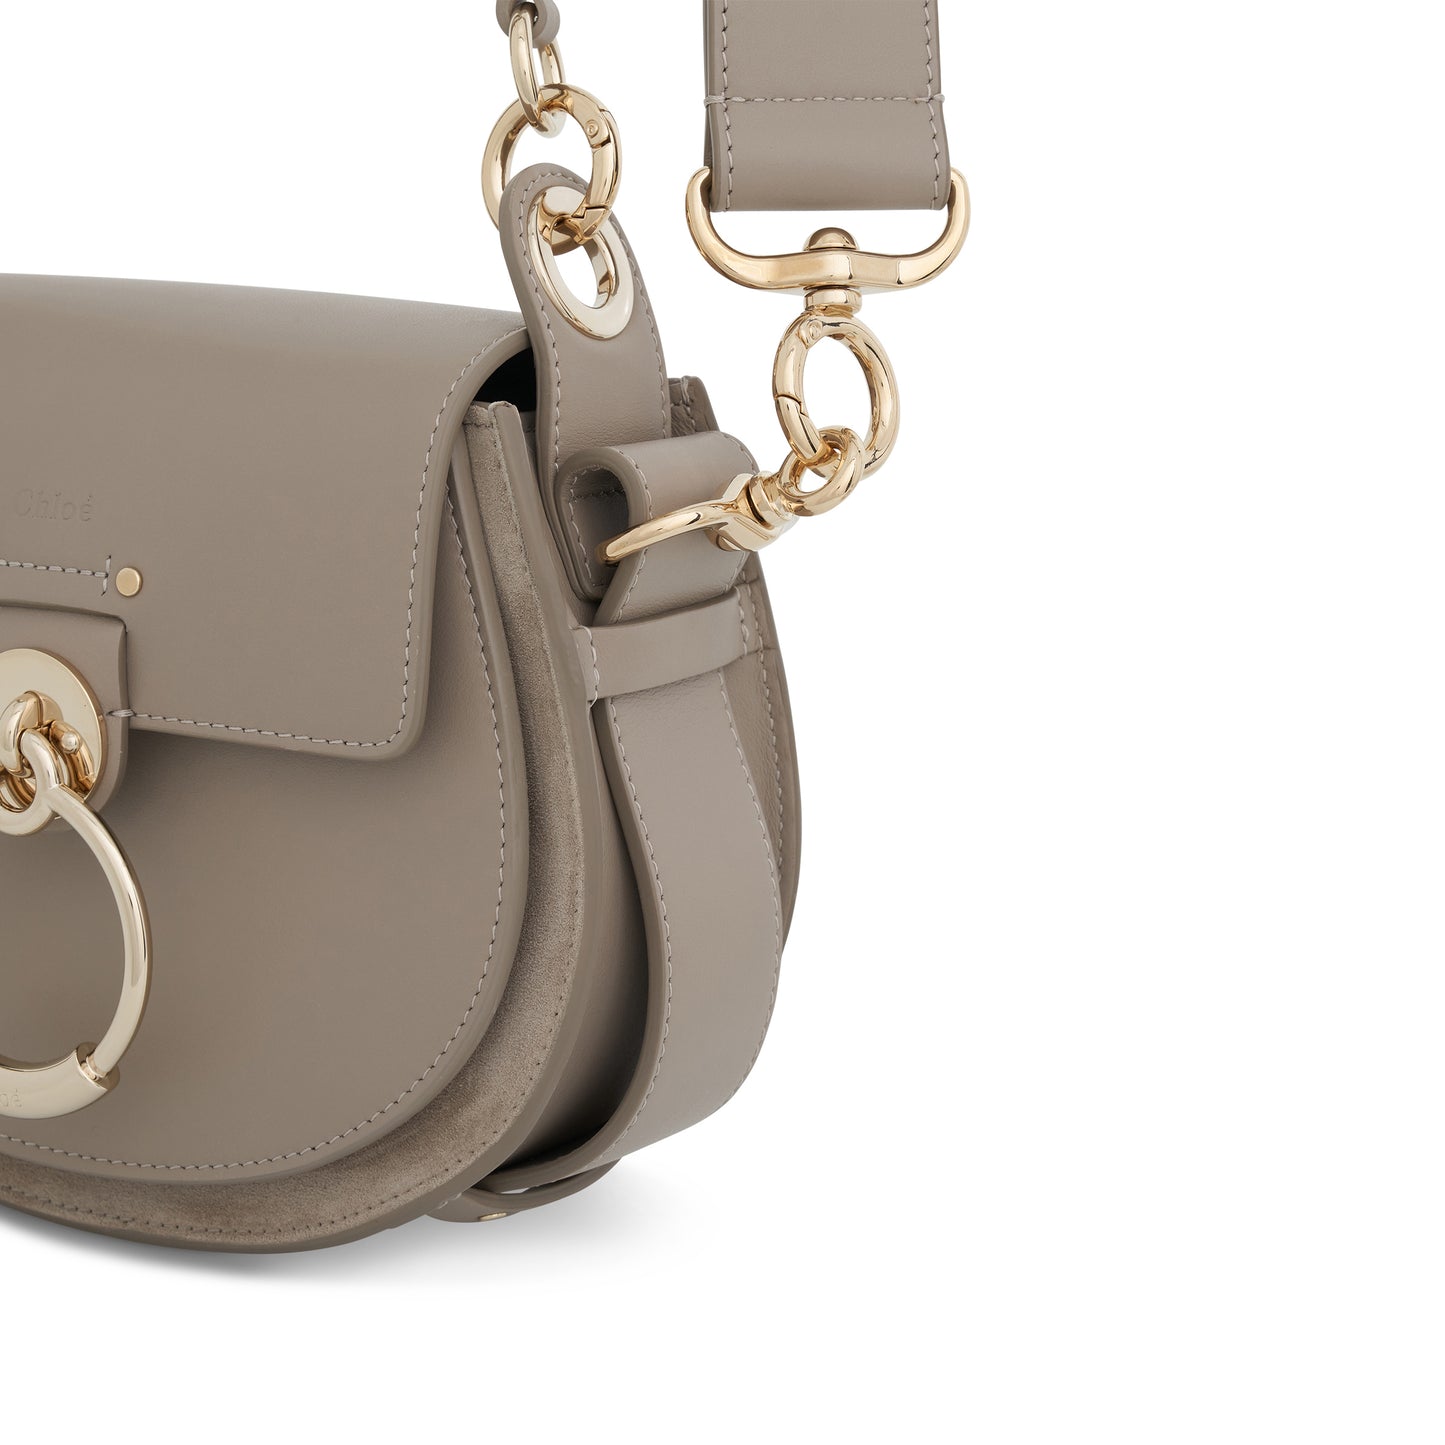 Small Tess Bag in Shiny and Suede Calfskin in Motty Grey